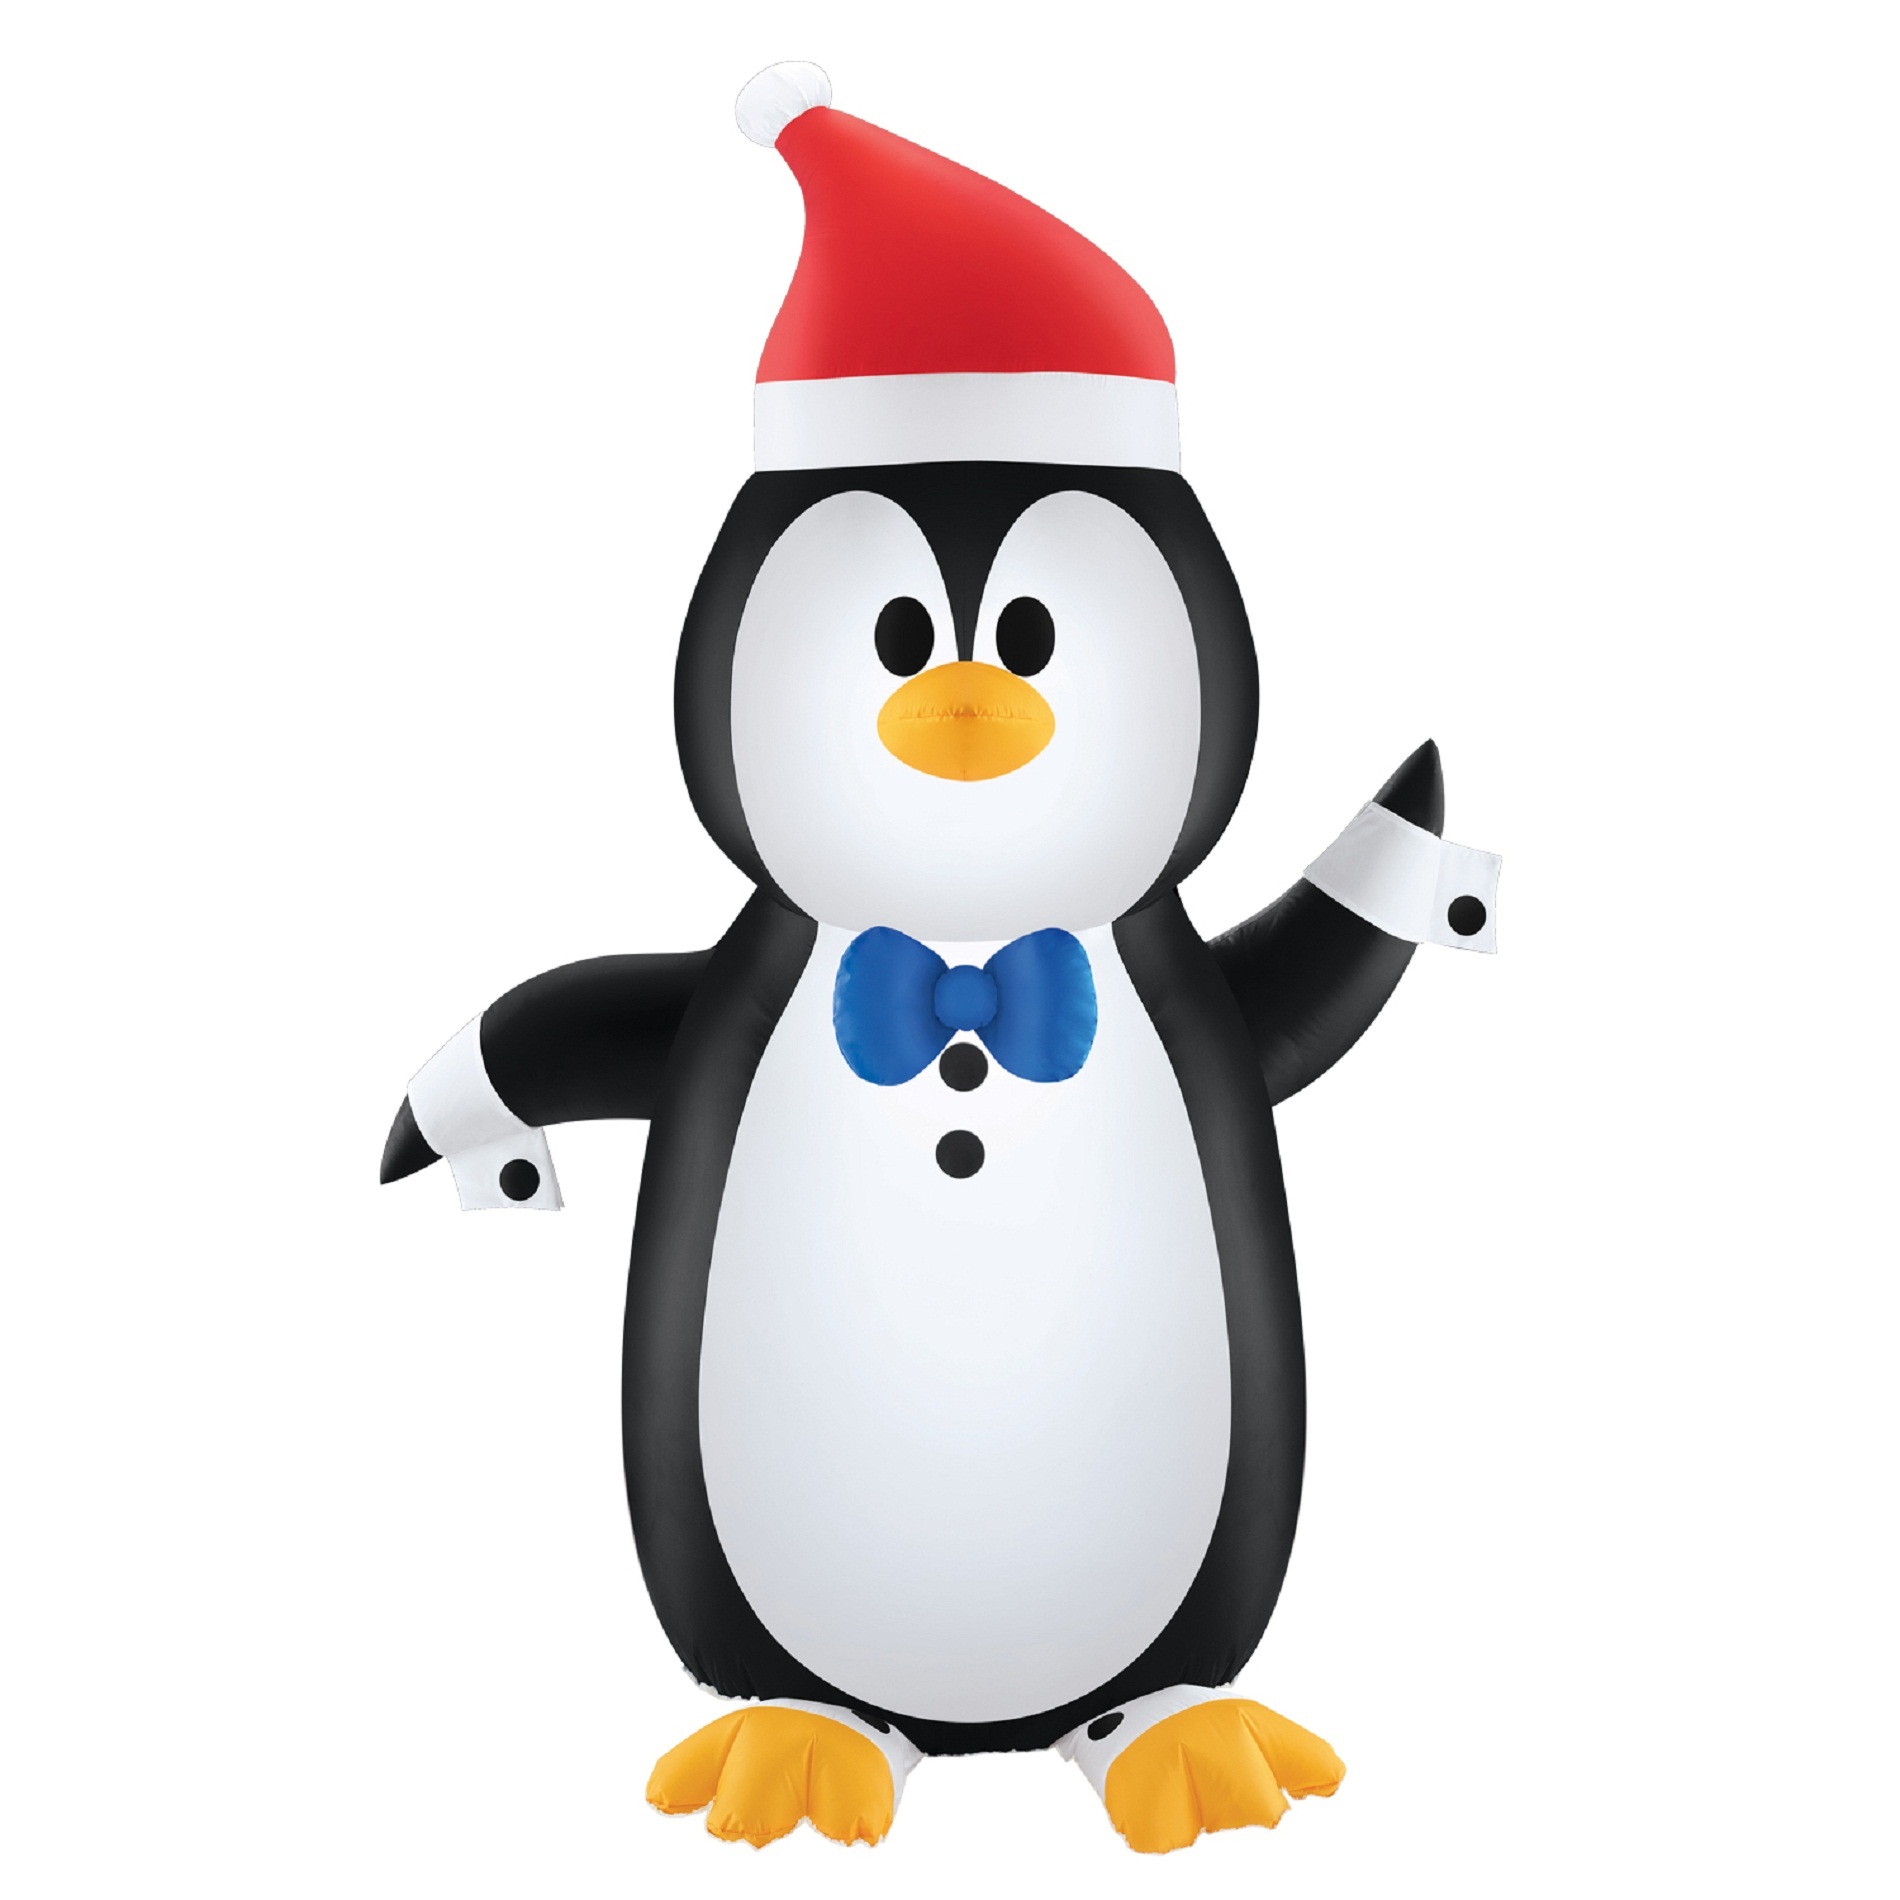 Trimming Traditions Christmas Outdoor Decorations Penguin Airblown, 6 ft